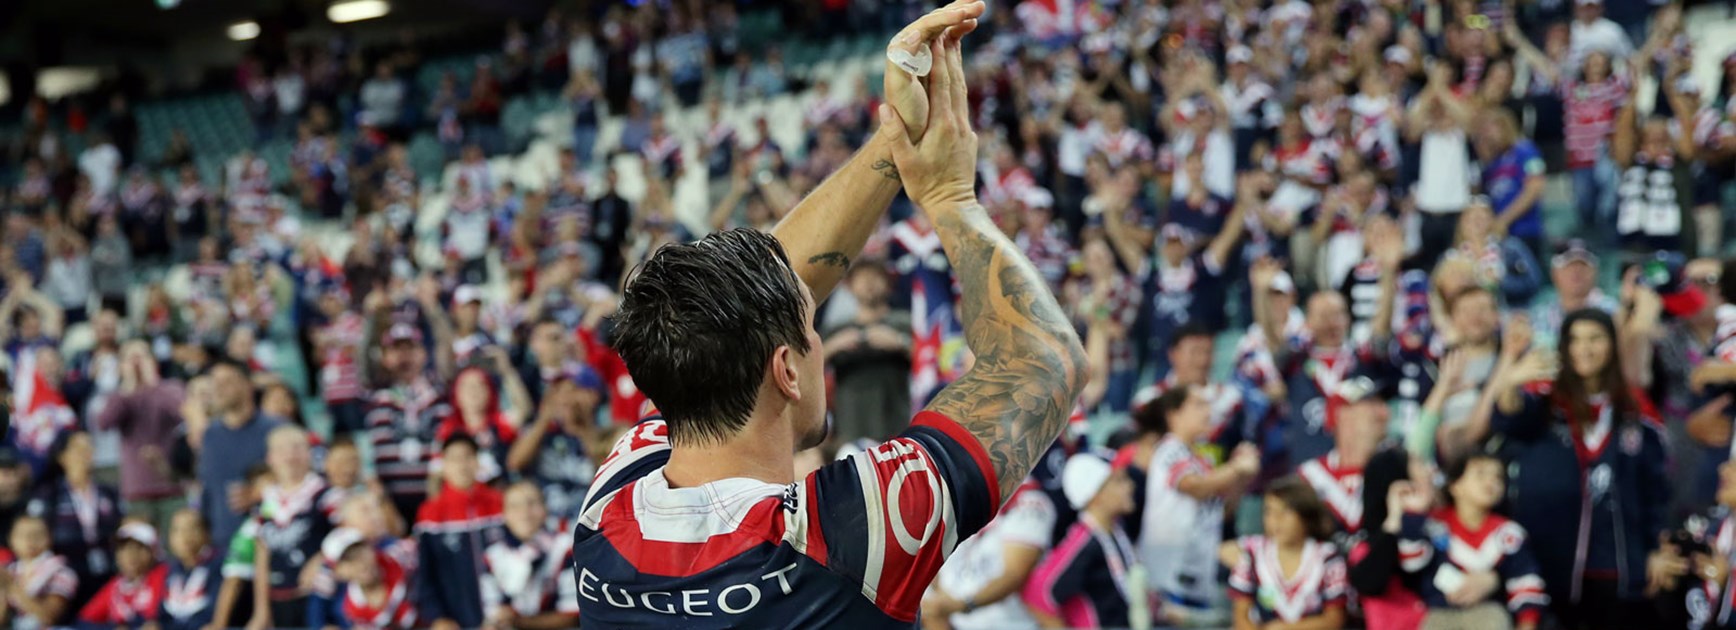 Mitchell Pearce was rewarded for his form with the Roosters with the PM's XIII No.7 jersey.